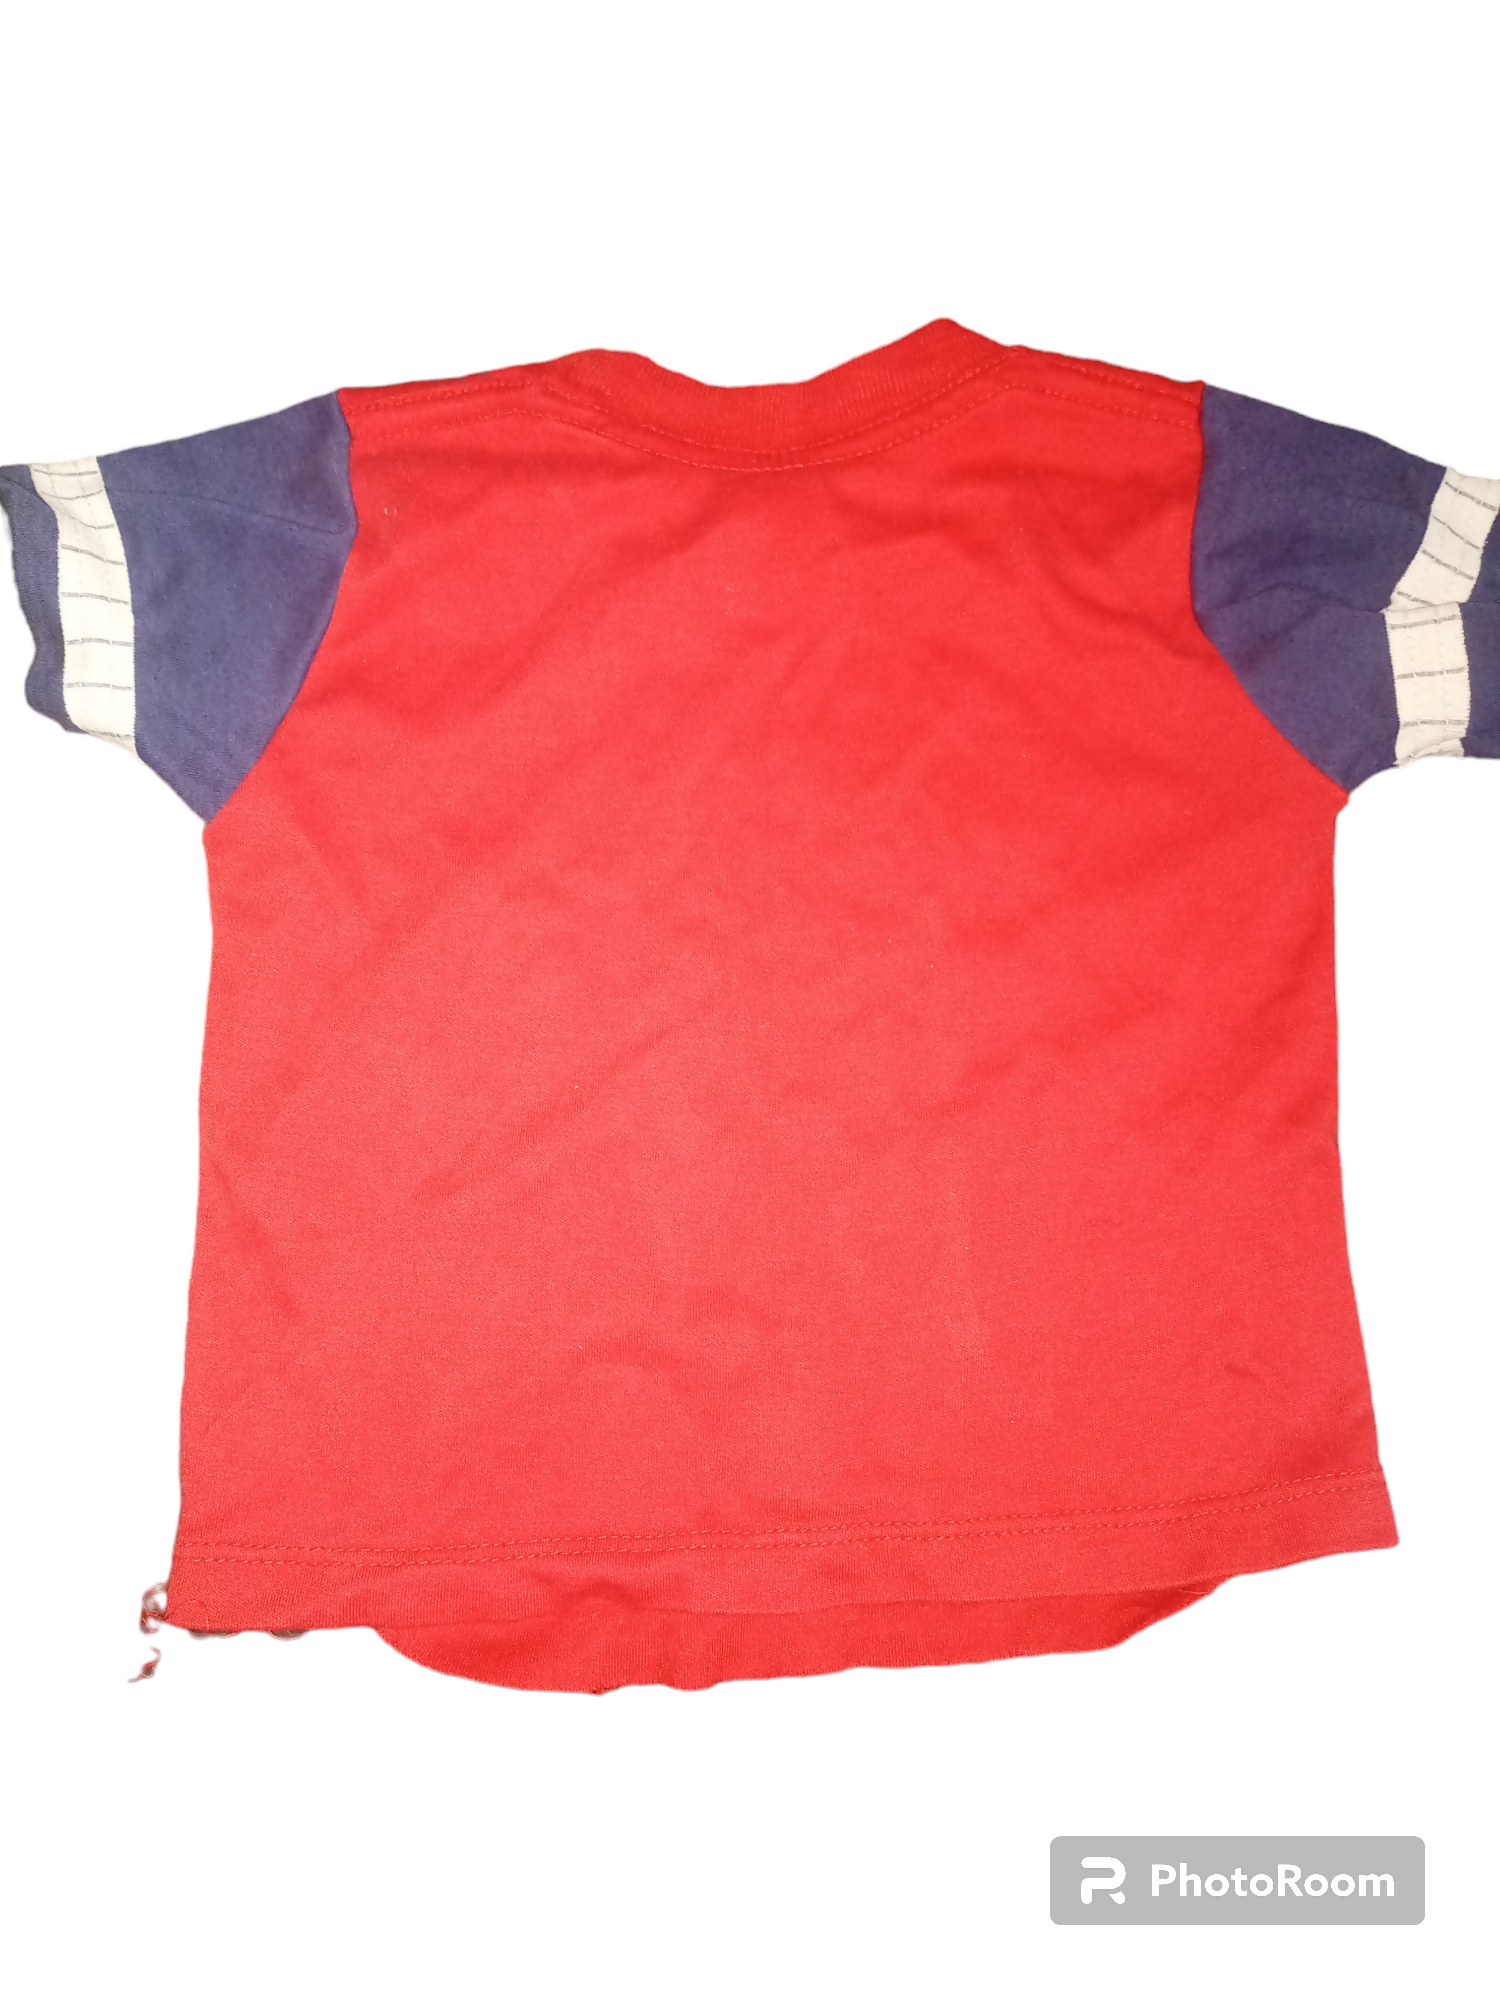 T shirt for baby boys (Size: S) | Boys Tops & Shirts | Worn Once